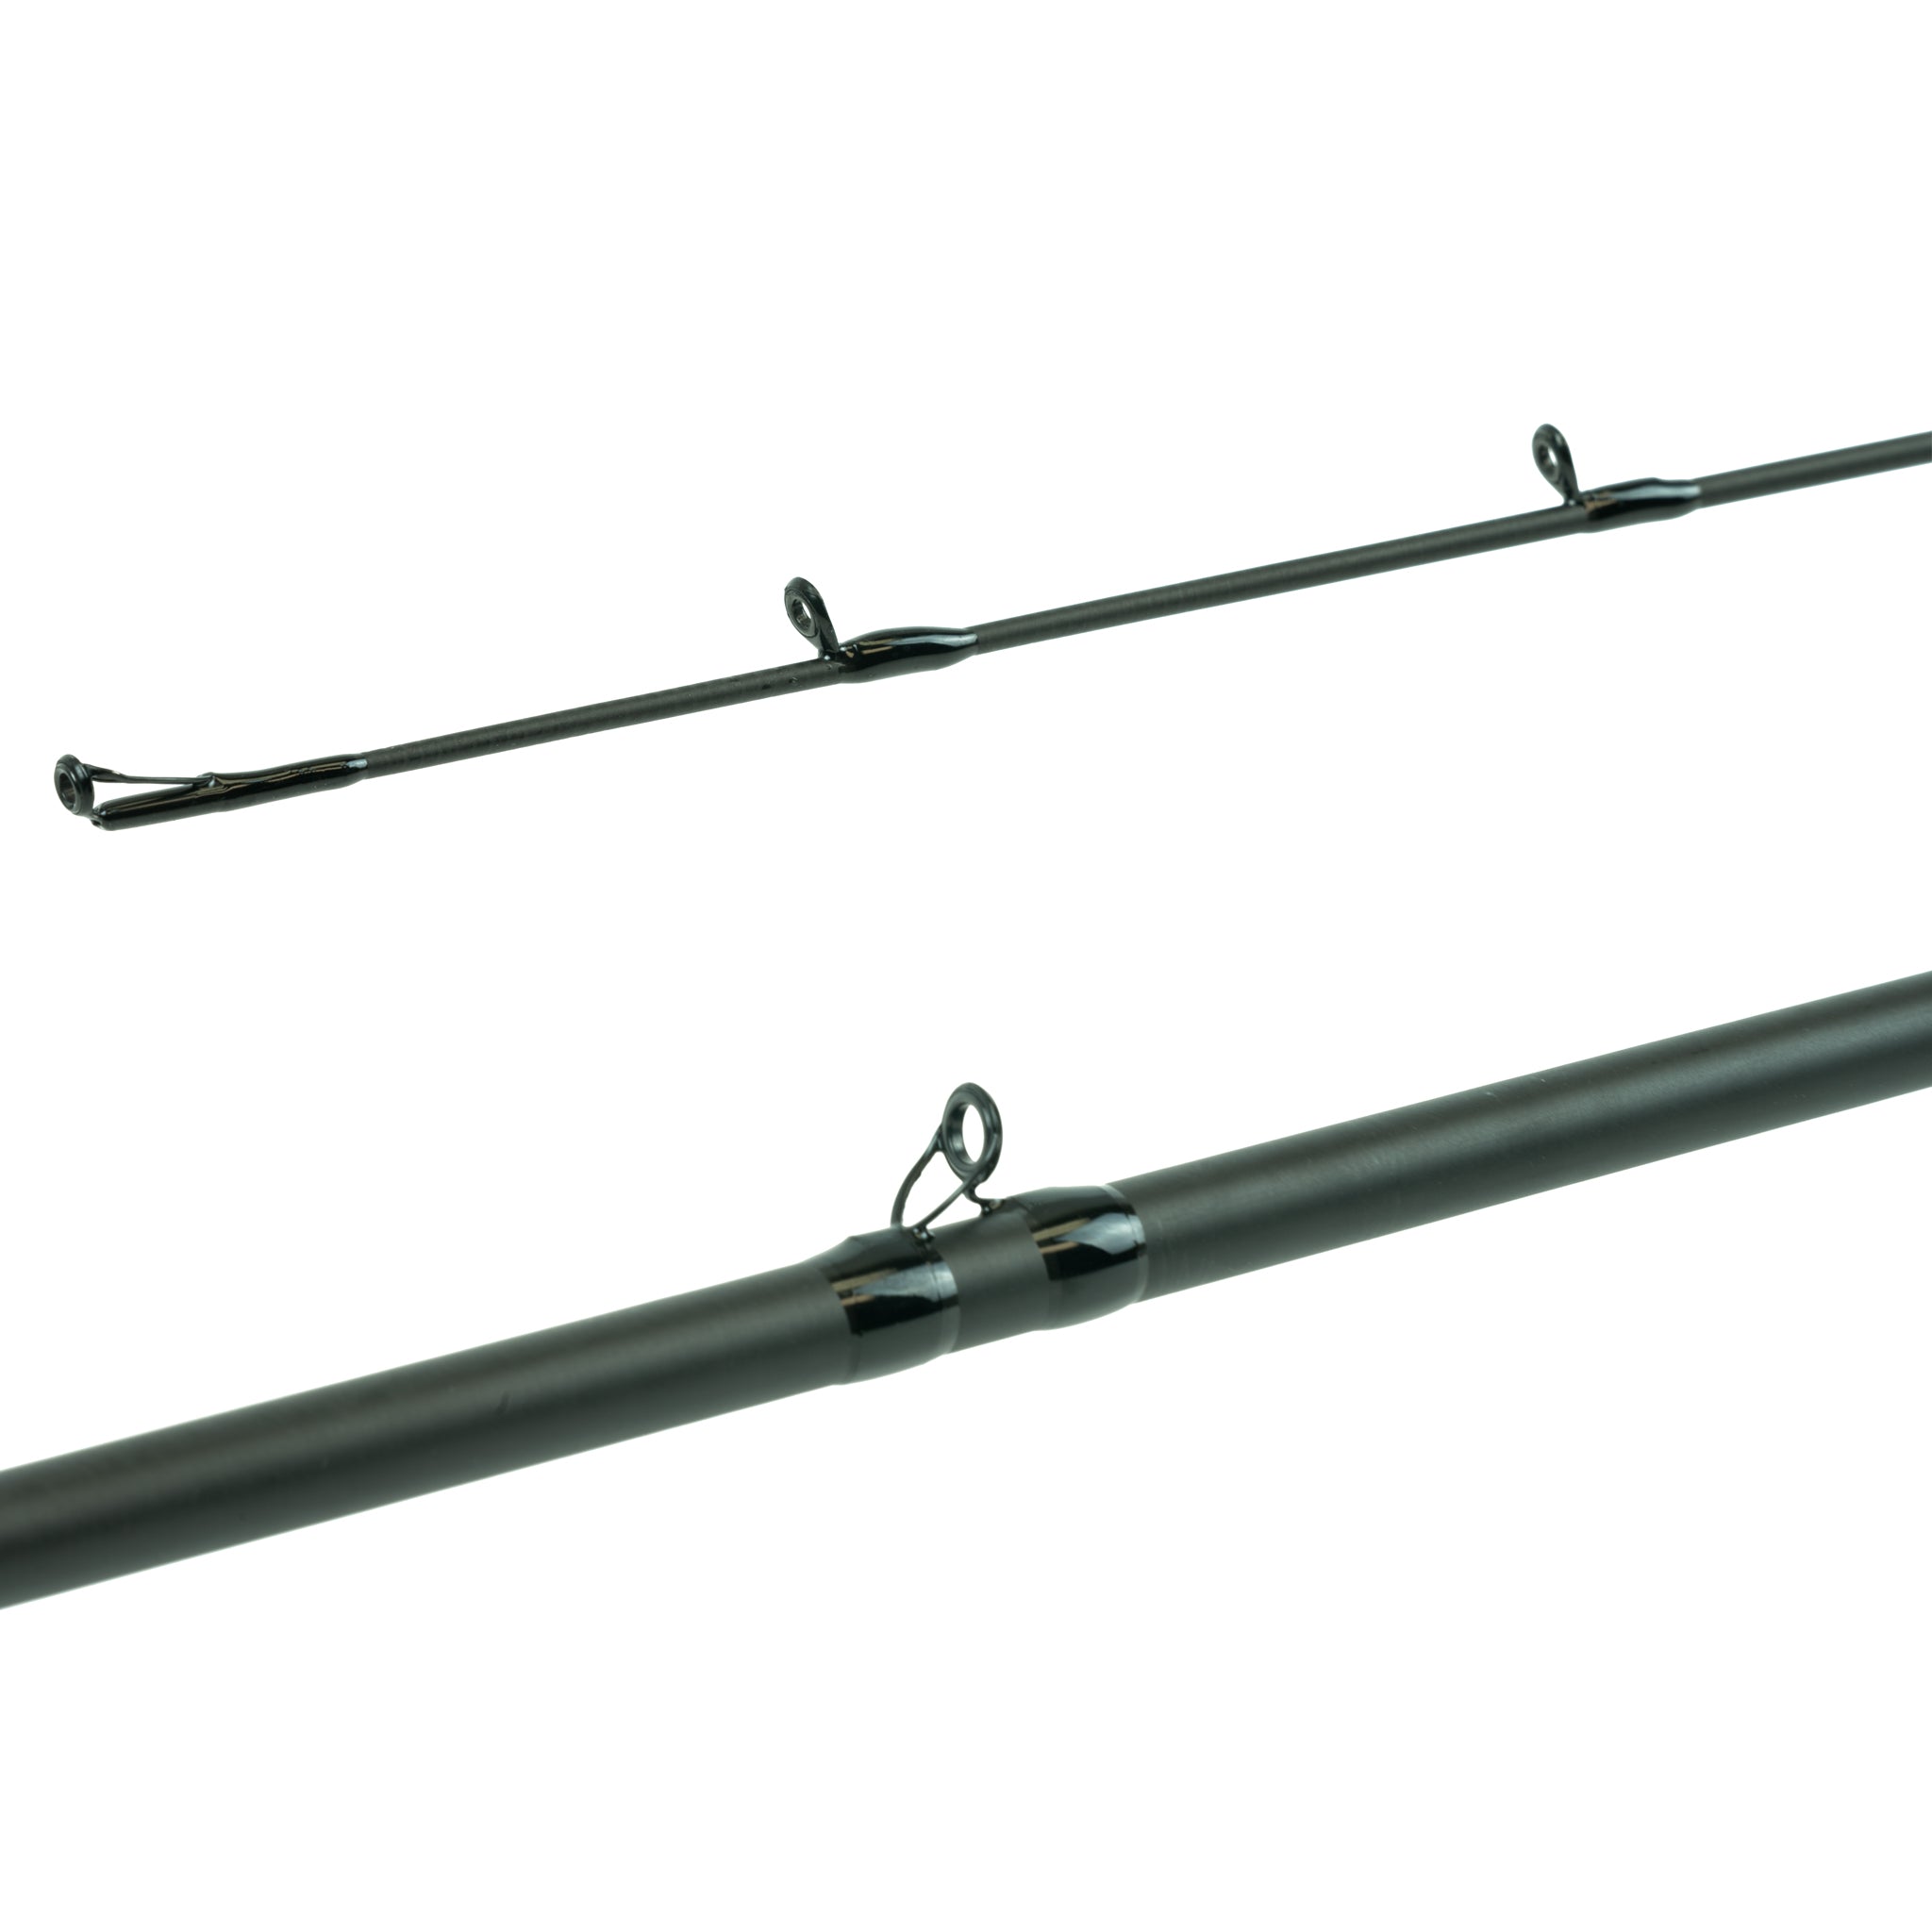 Calypso Tropic 7' 6 Popping Rod - Med. Heavy Action 2pc. - Fishing  Outings